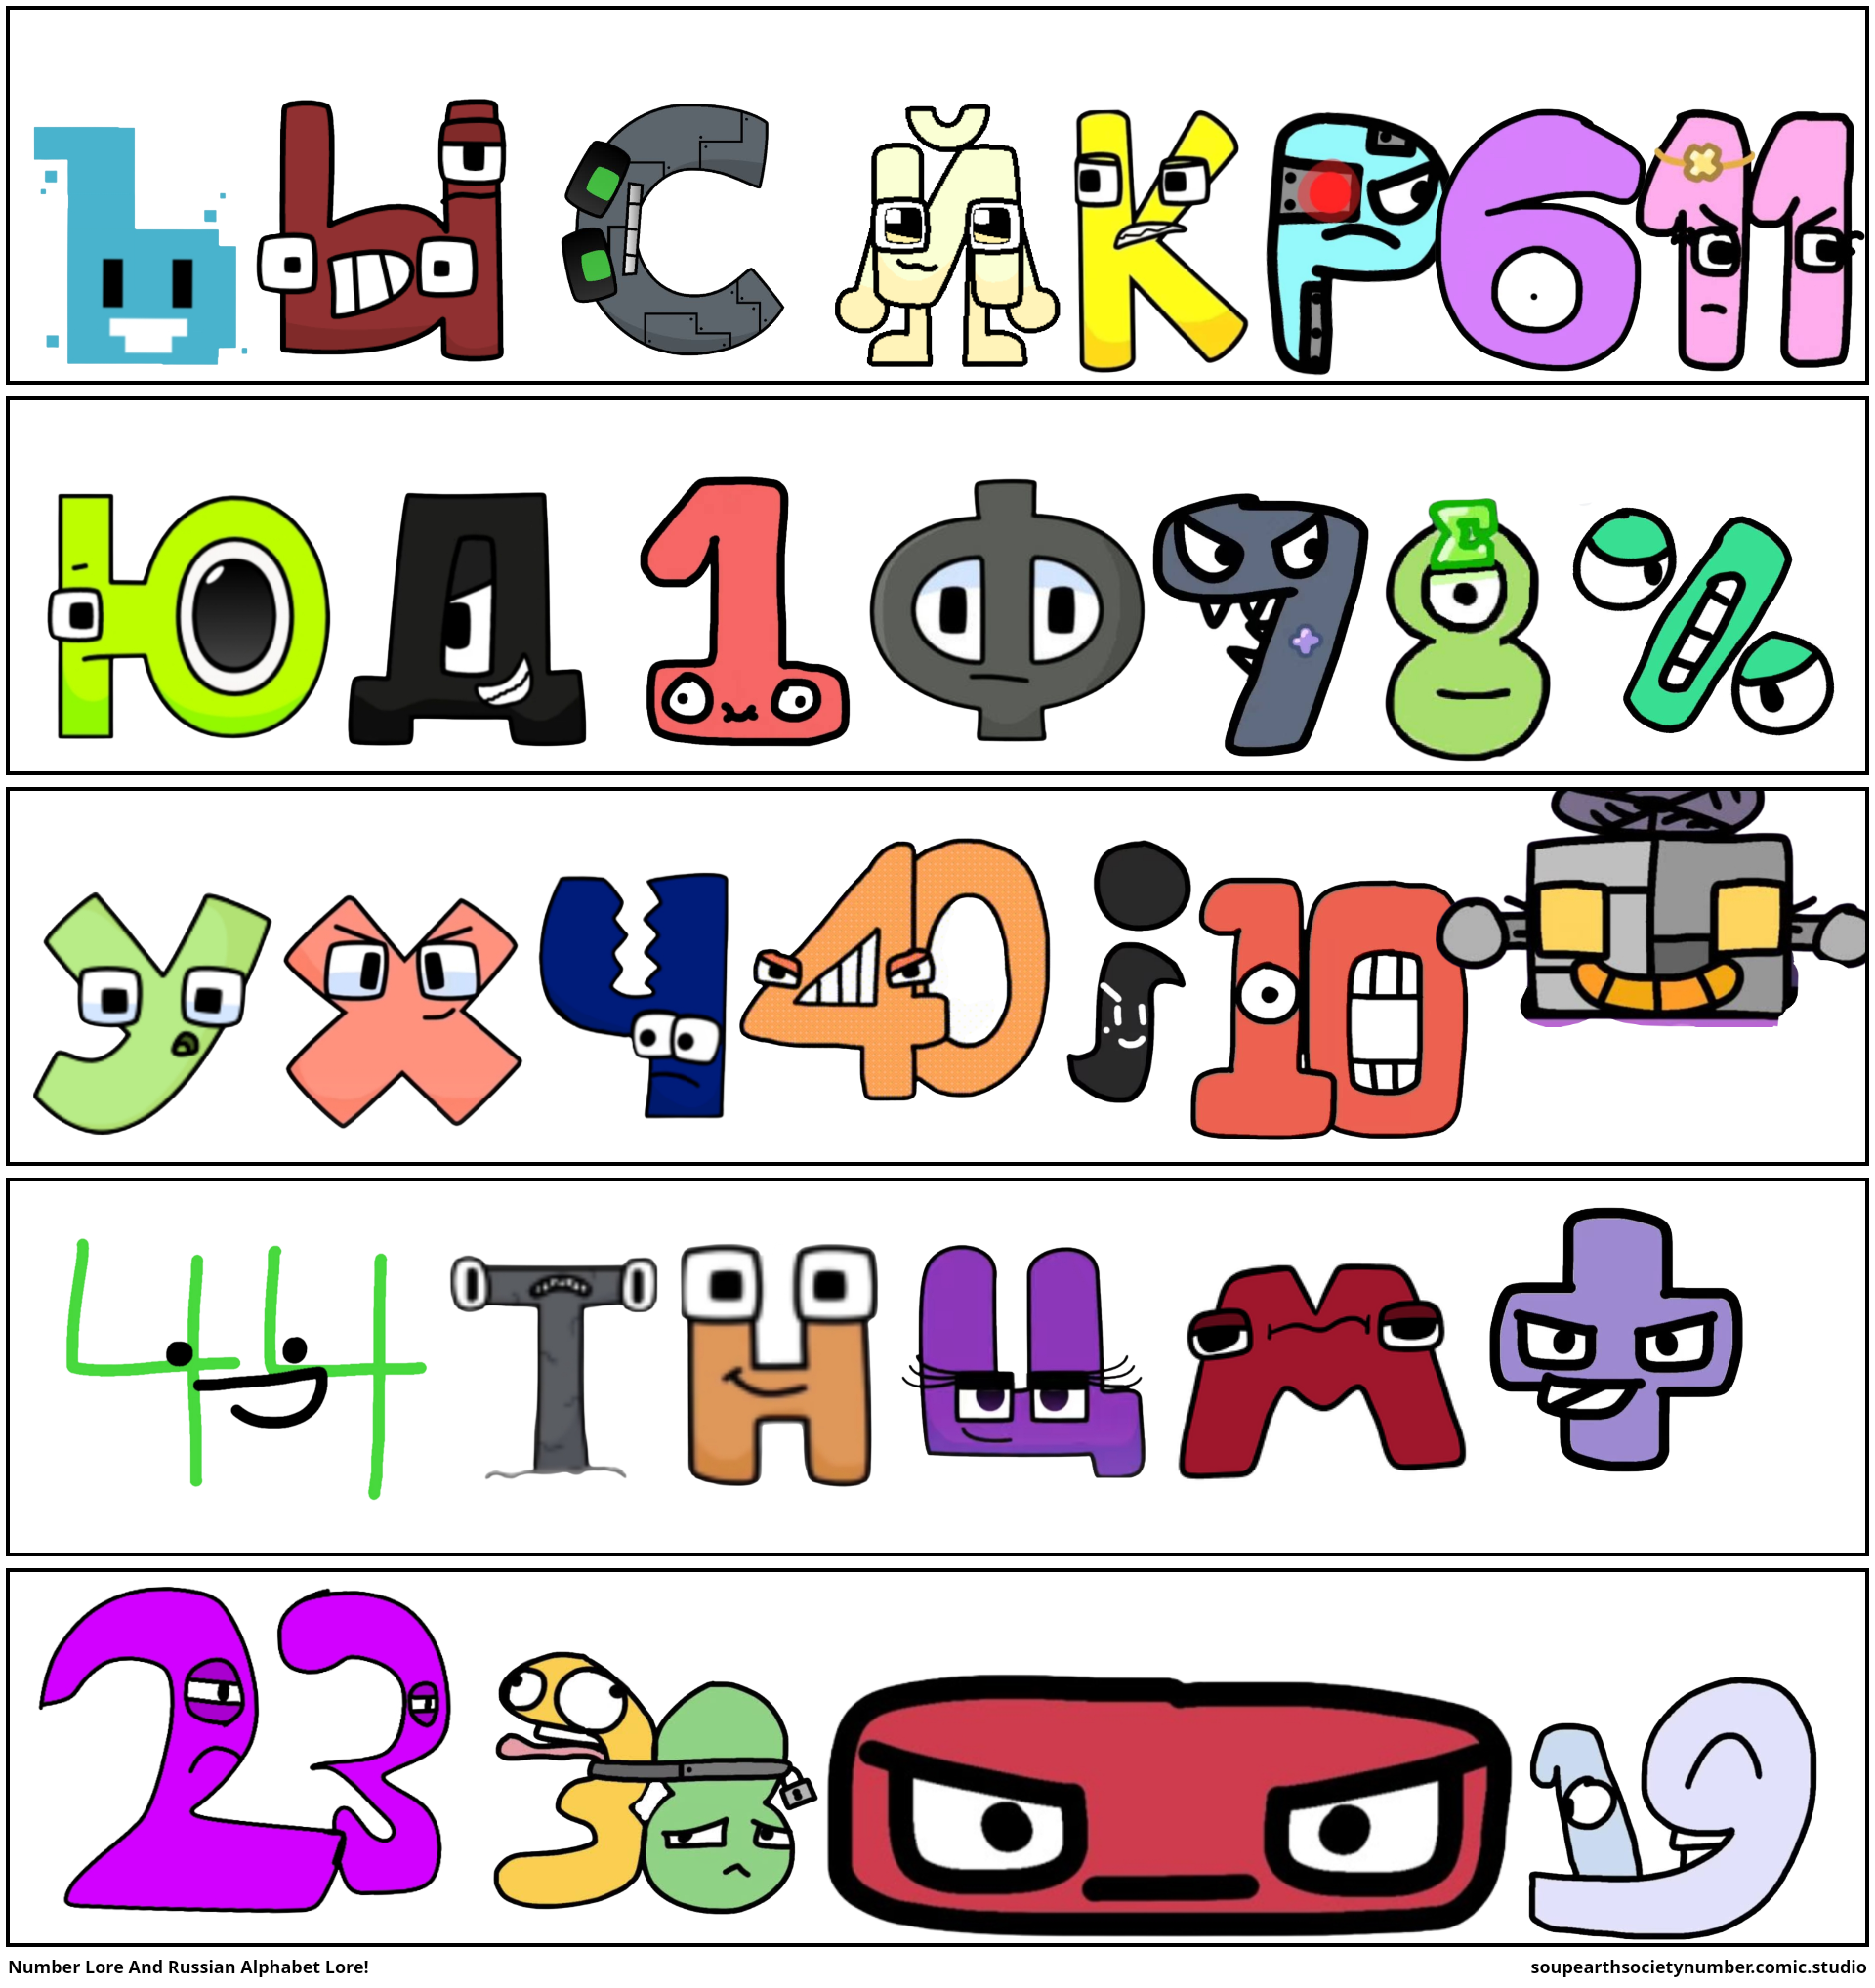 Number Lore And Russian Alphabet Lore!